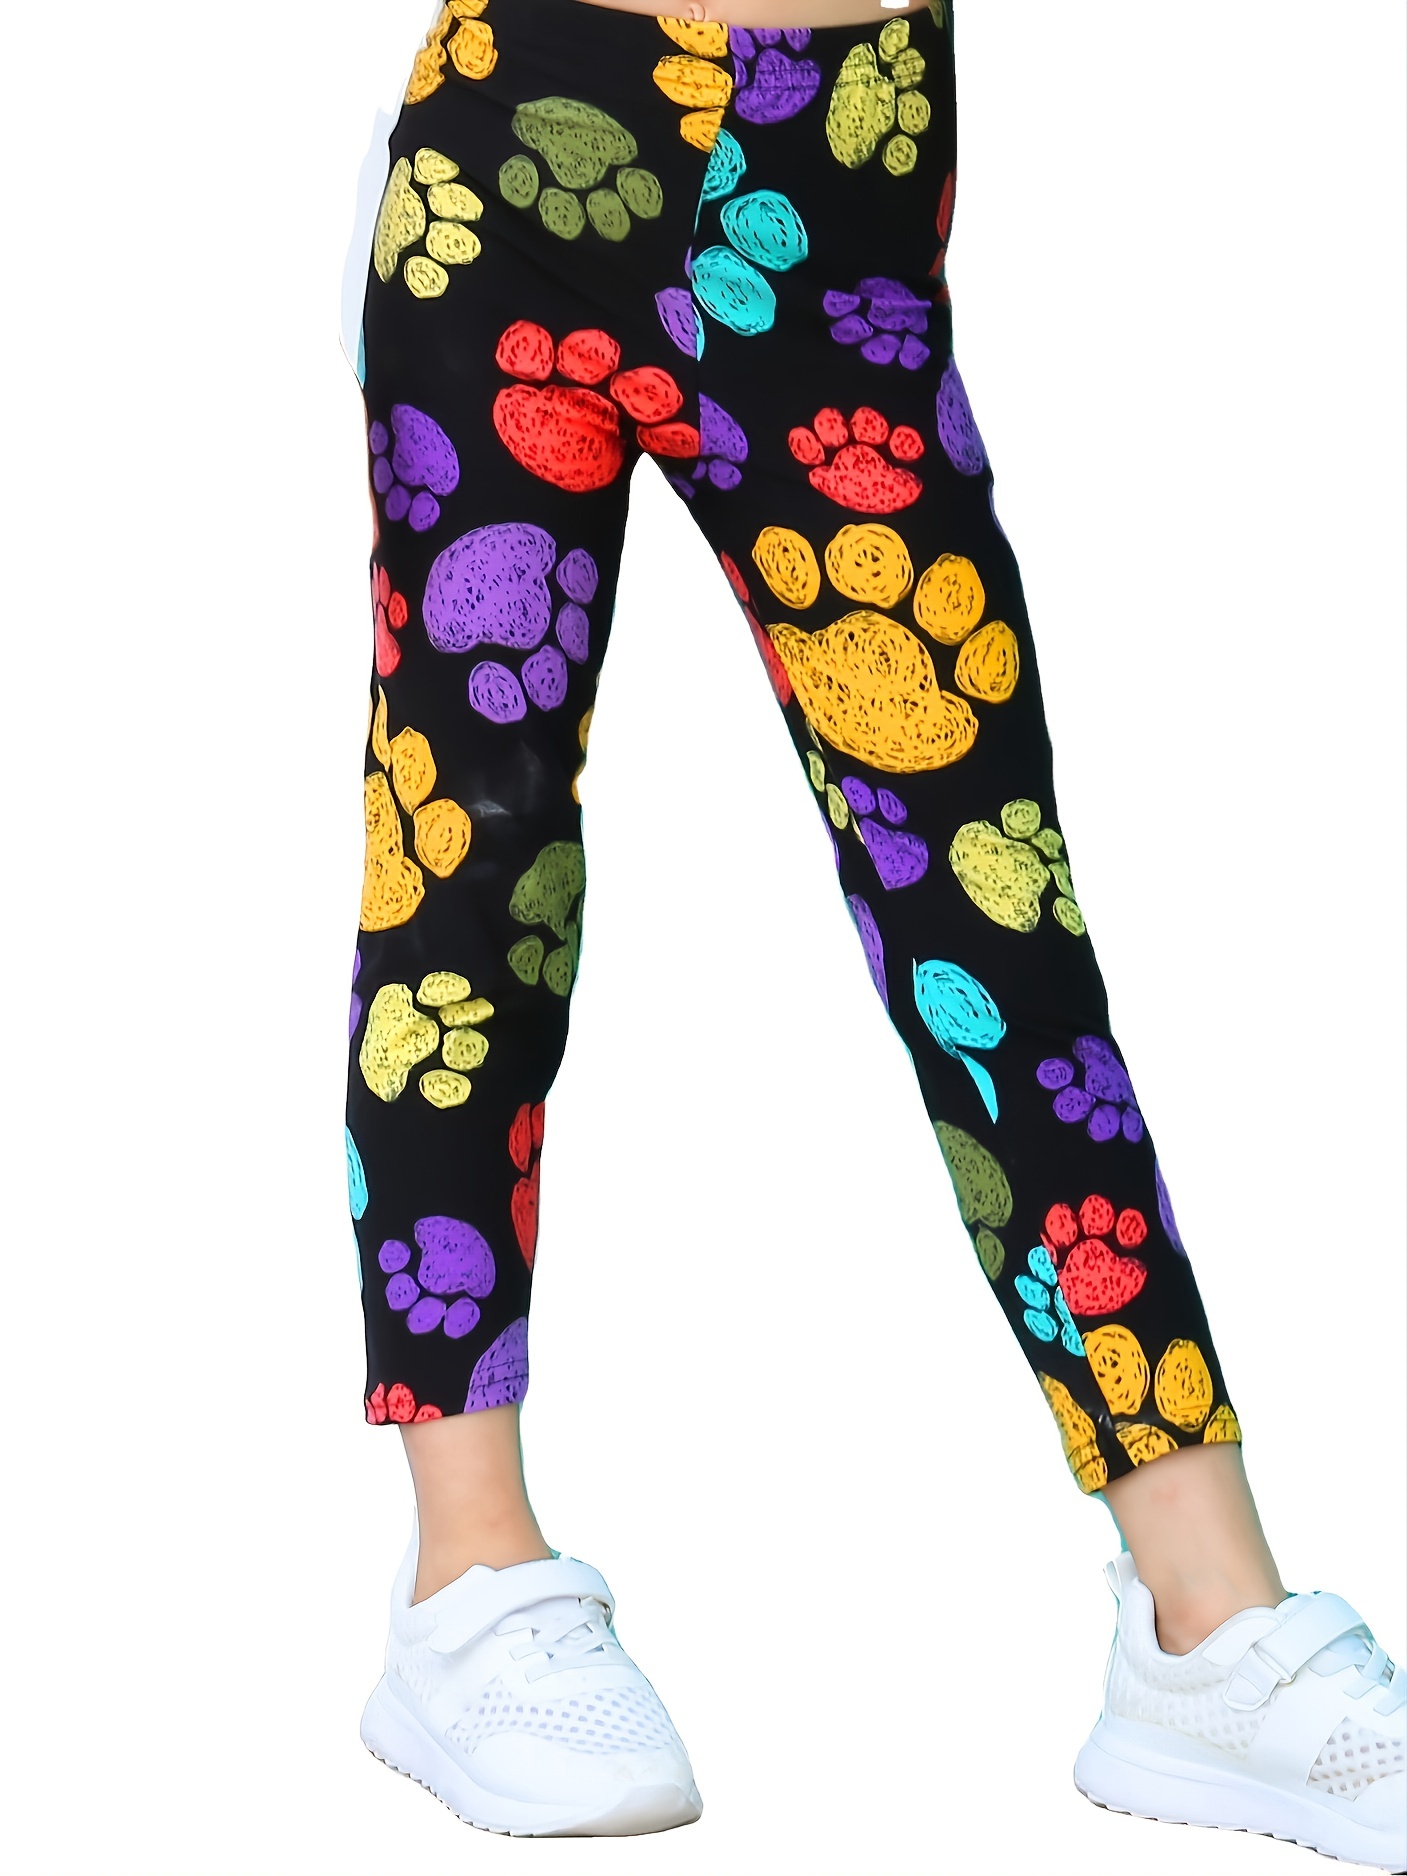  J JOYSAY Mistletoe Branches Berries Girls Leggings Girls Pants  Athletic Tights Pants for Kids Girls, 9-10T Multicoloured: Clothing, Shoes  & Jewelry